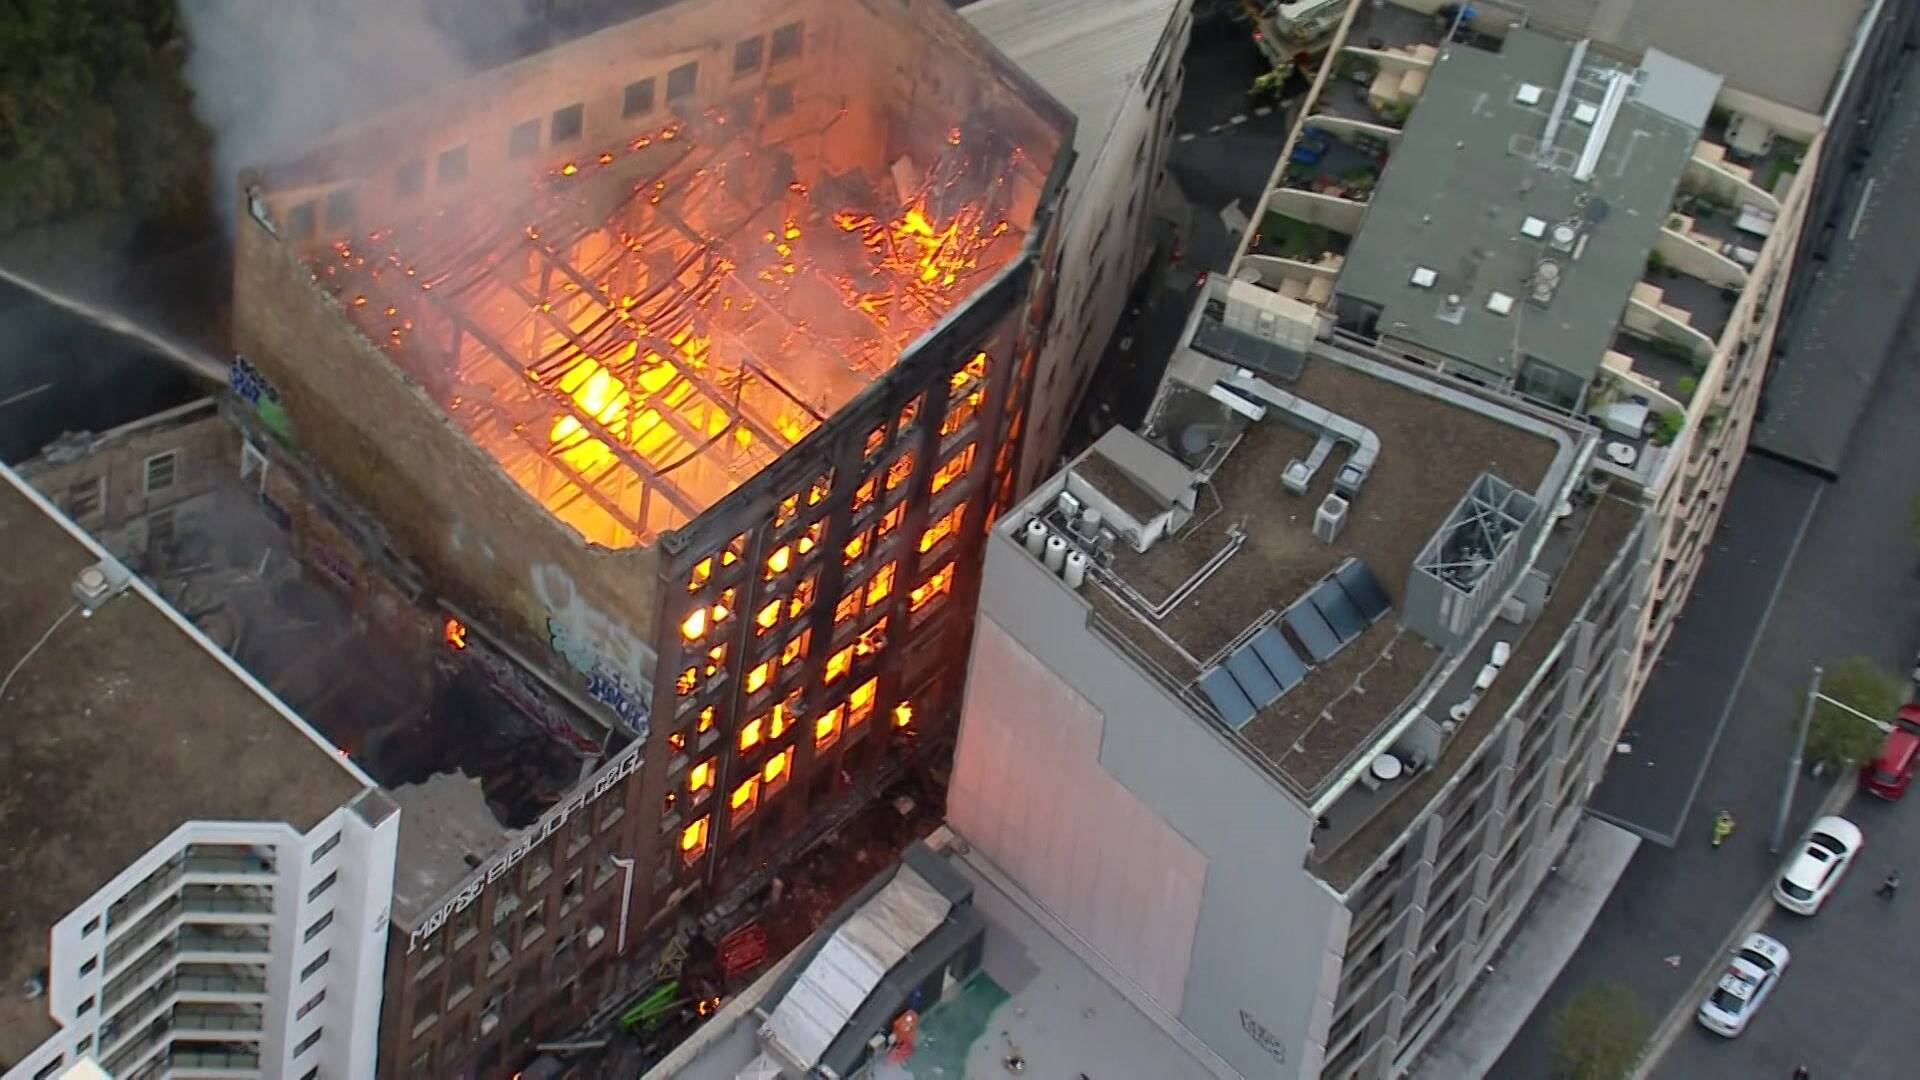 A seven-story building in Sydney, Australia has caught fire, and more than a hundred firefighters have been mobilized